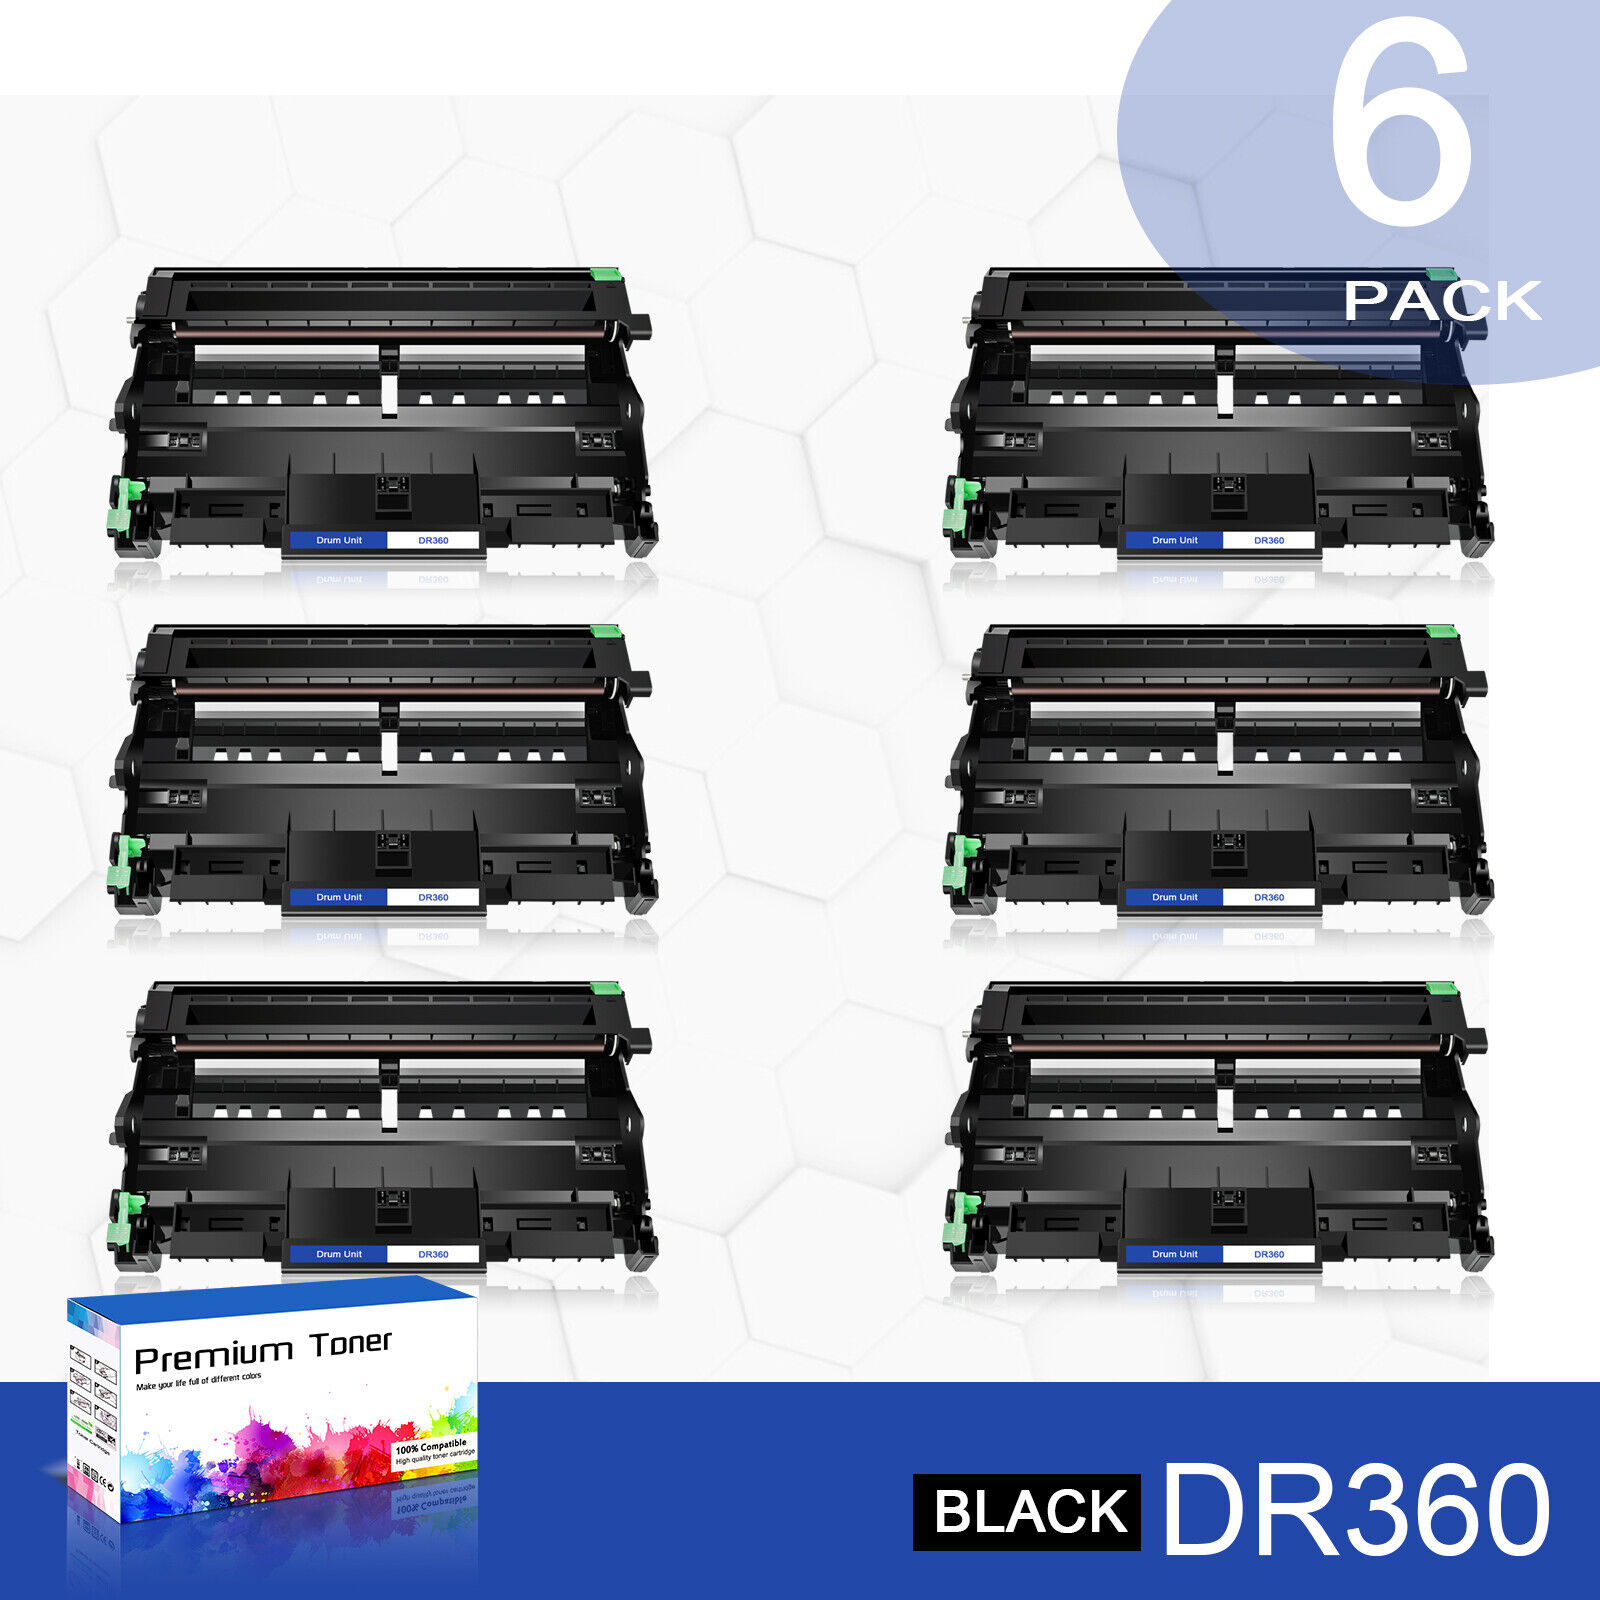 6PK DR360 Black High Yield Drum Unit Compatible with Brother MFC-7345N MFC-7440N